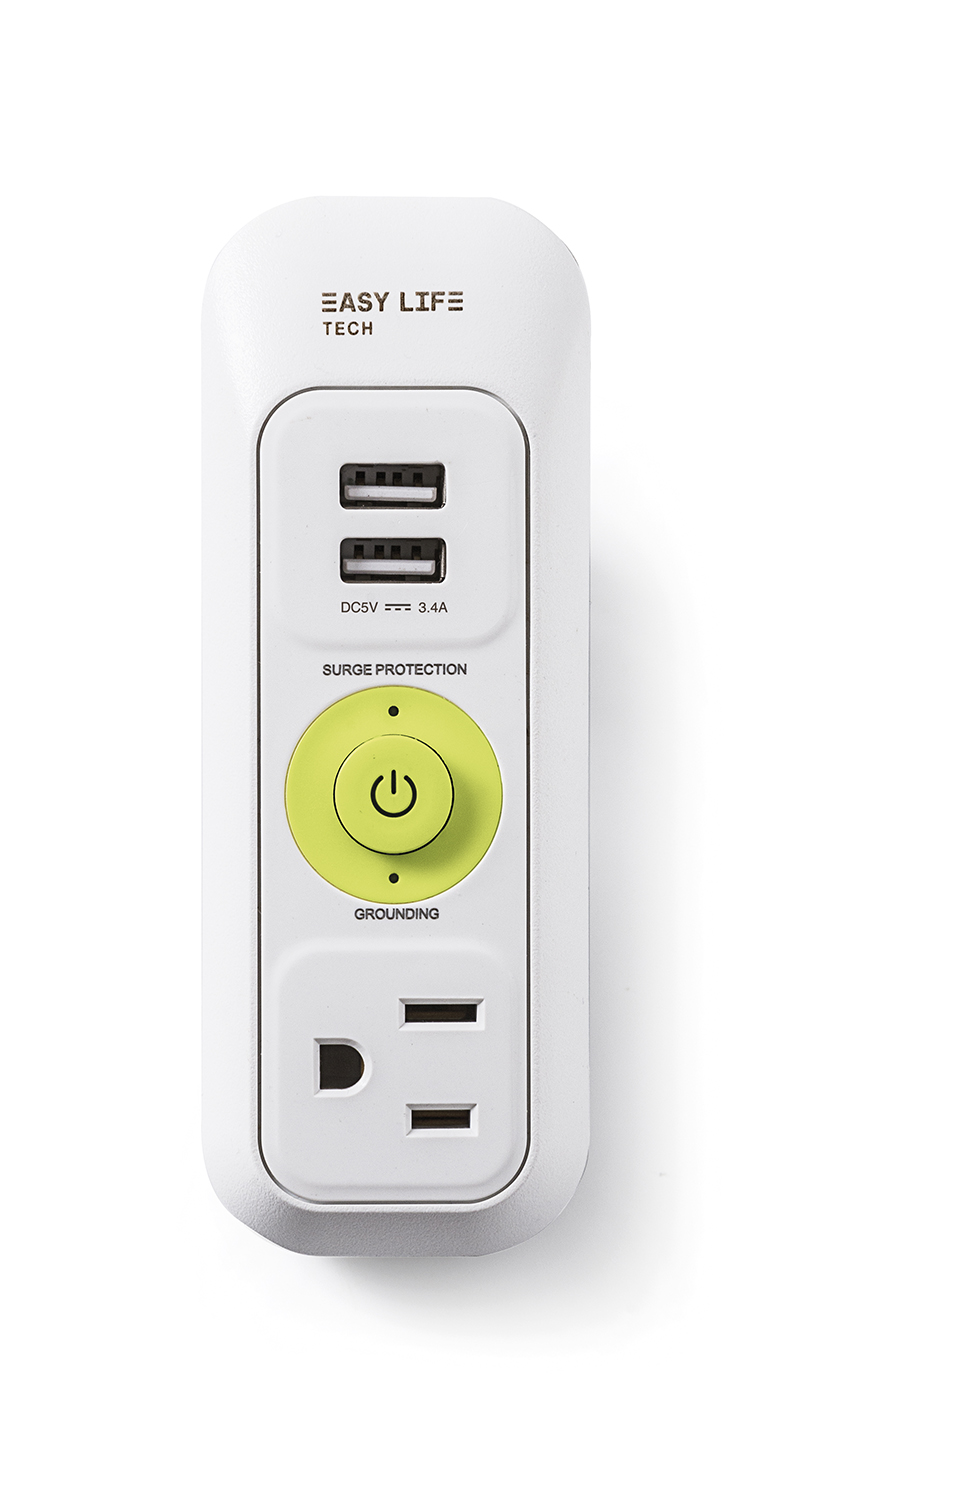 Products - EasyLife Tech by FAMATEL